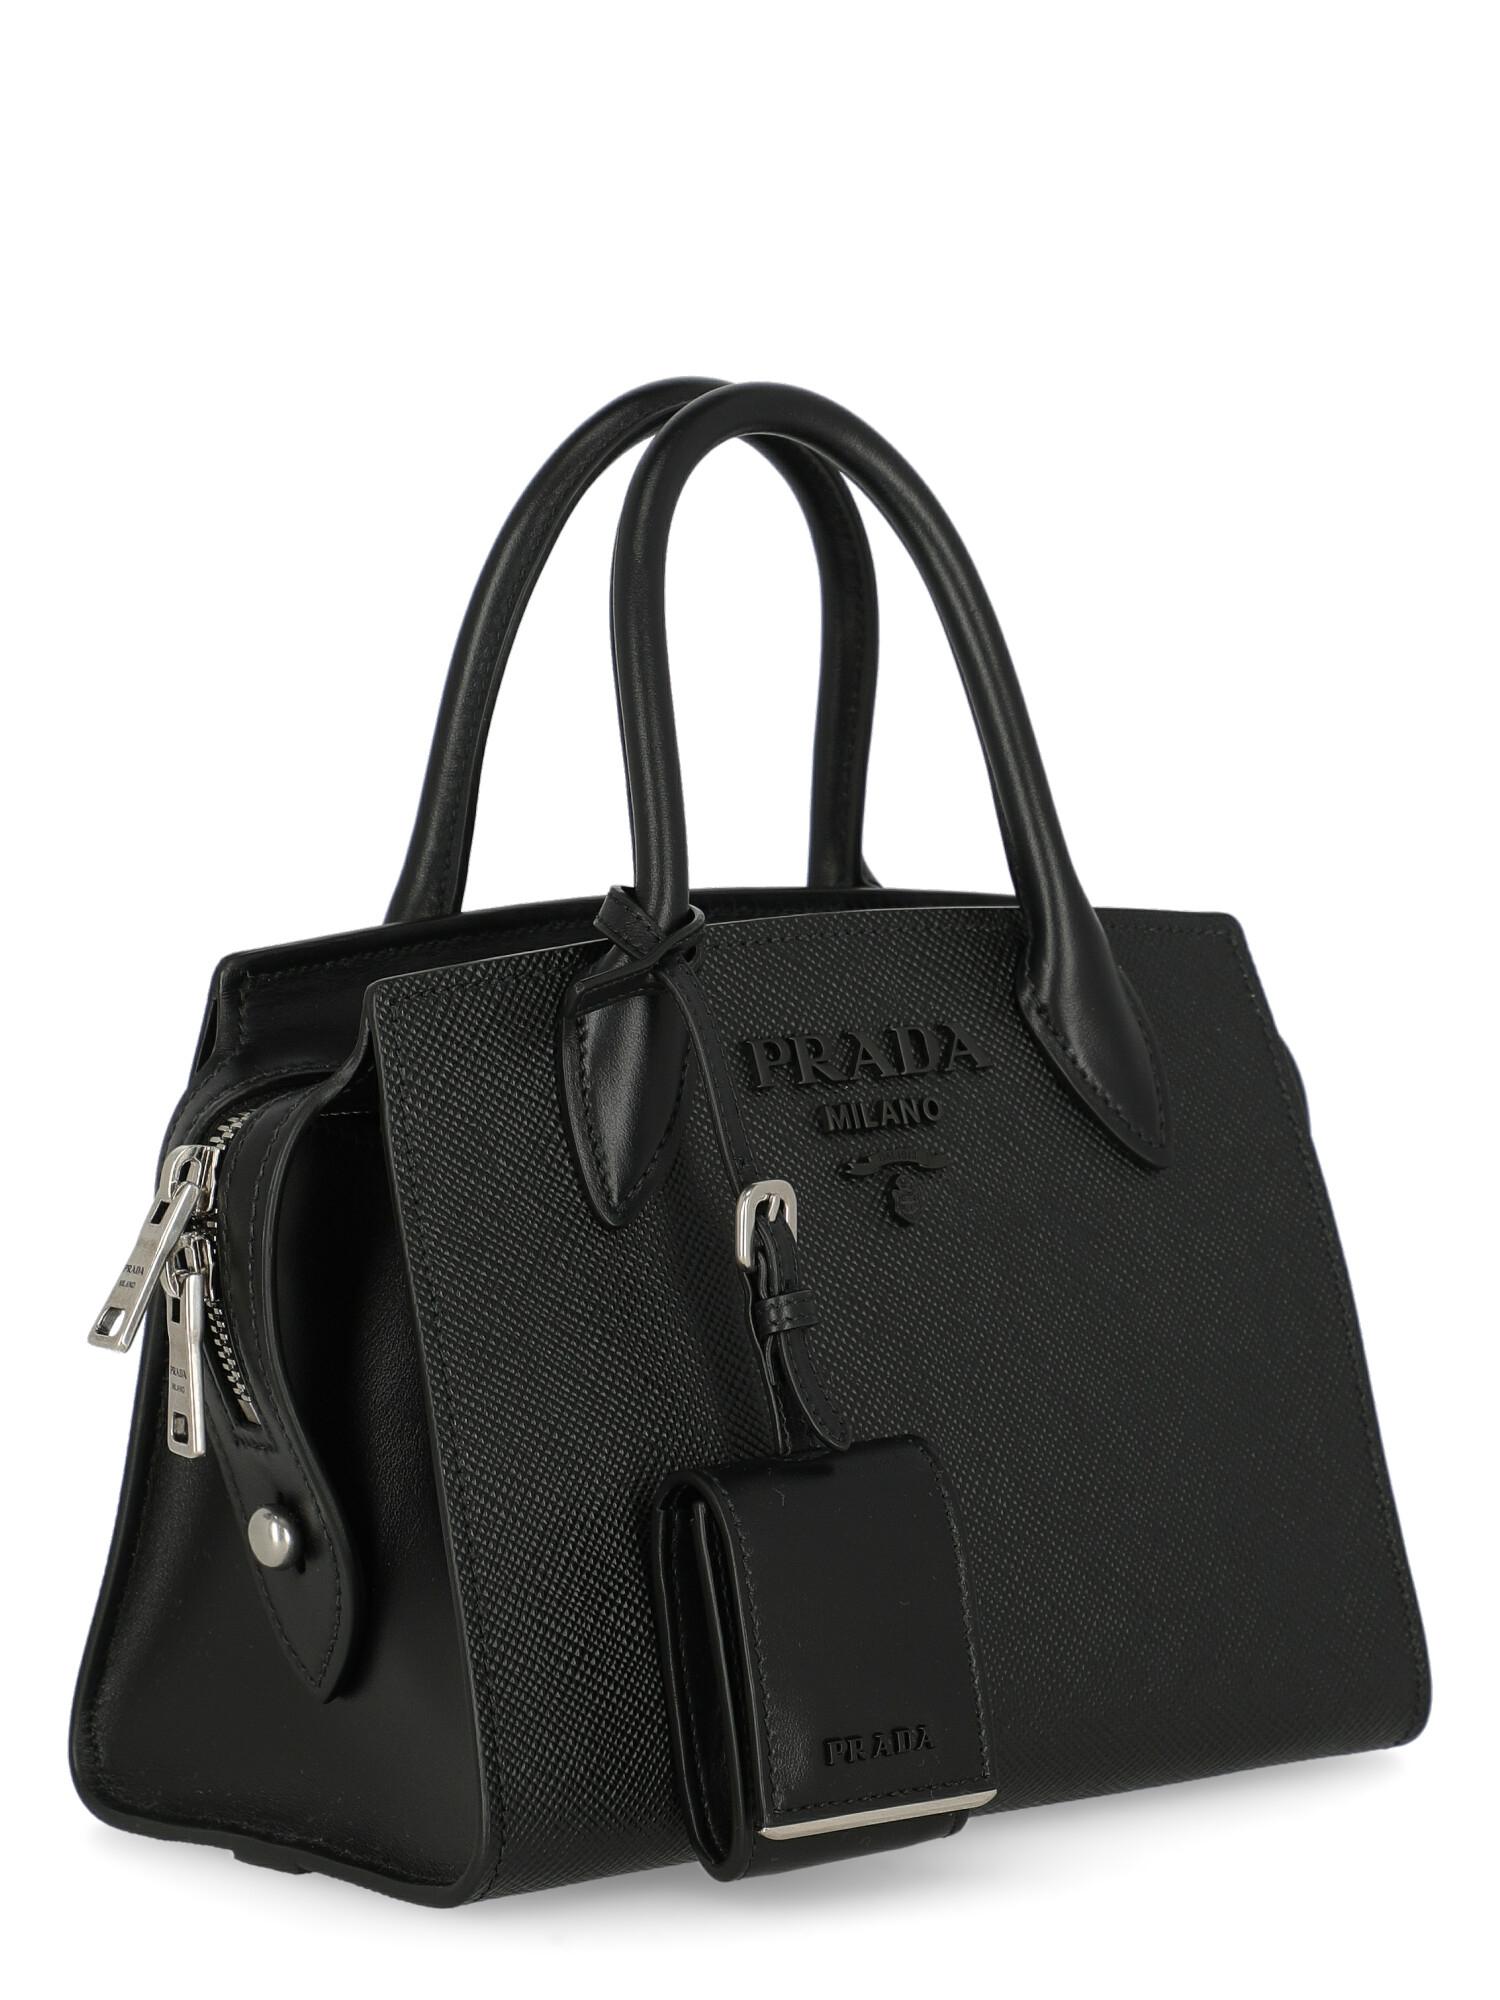 Prada  Women   Handbags  Black Leather  In Excellent Condition For Sale In Milan, IT